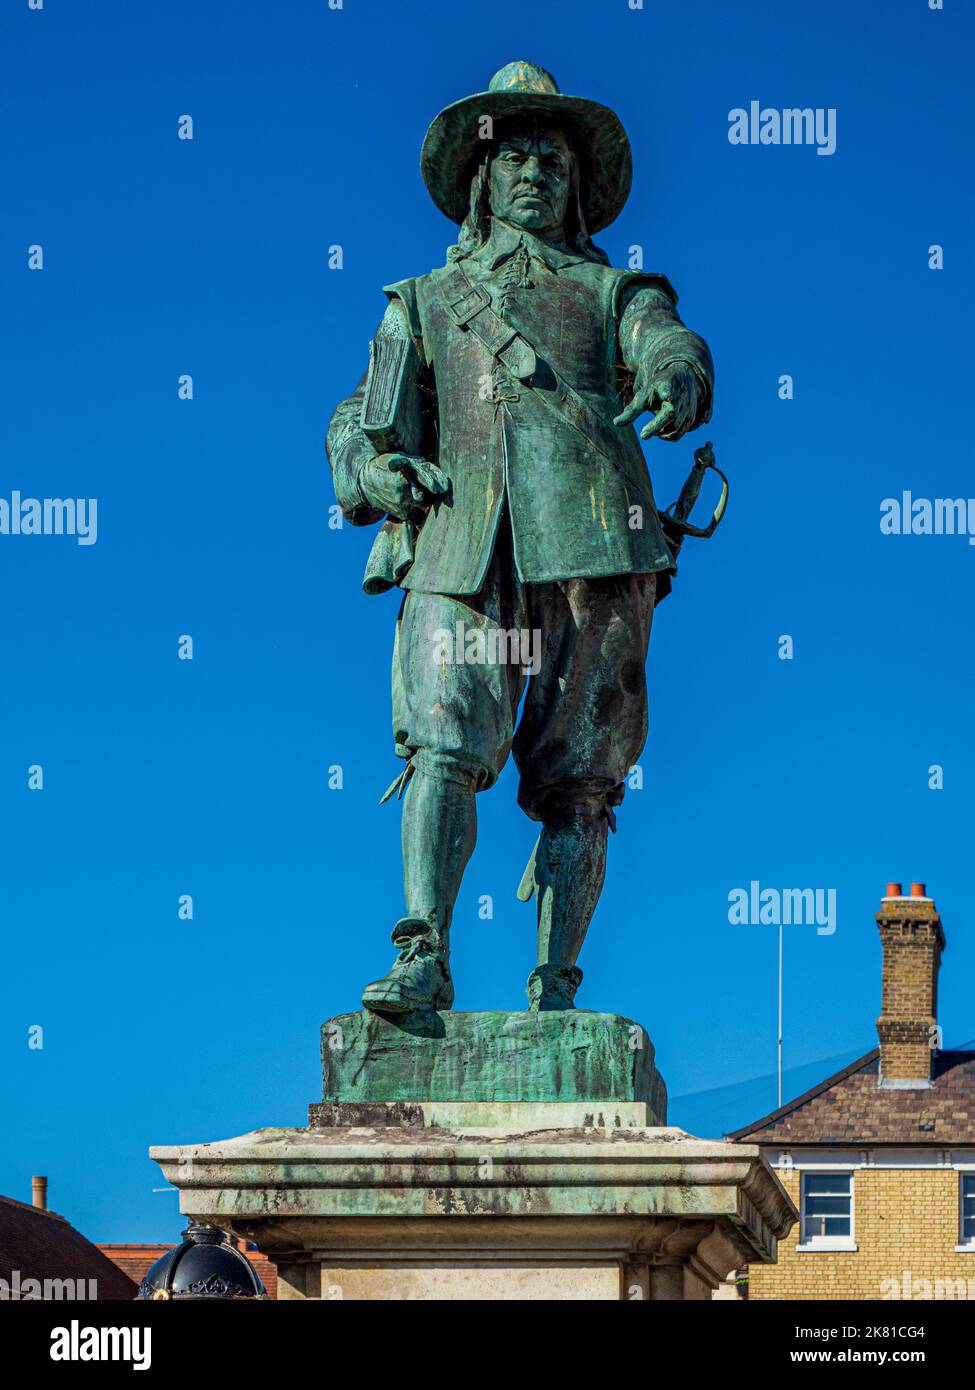 Oliver Cromwell Statue St Ives Cambridgeshire UK. Designed by F. W. Pomeroy and erected on Market Hill St Ives in 1901 by public subscription. Stock Photo